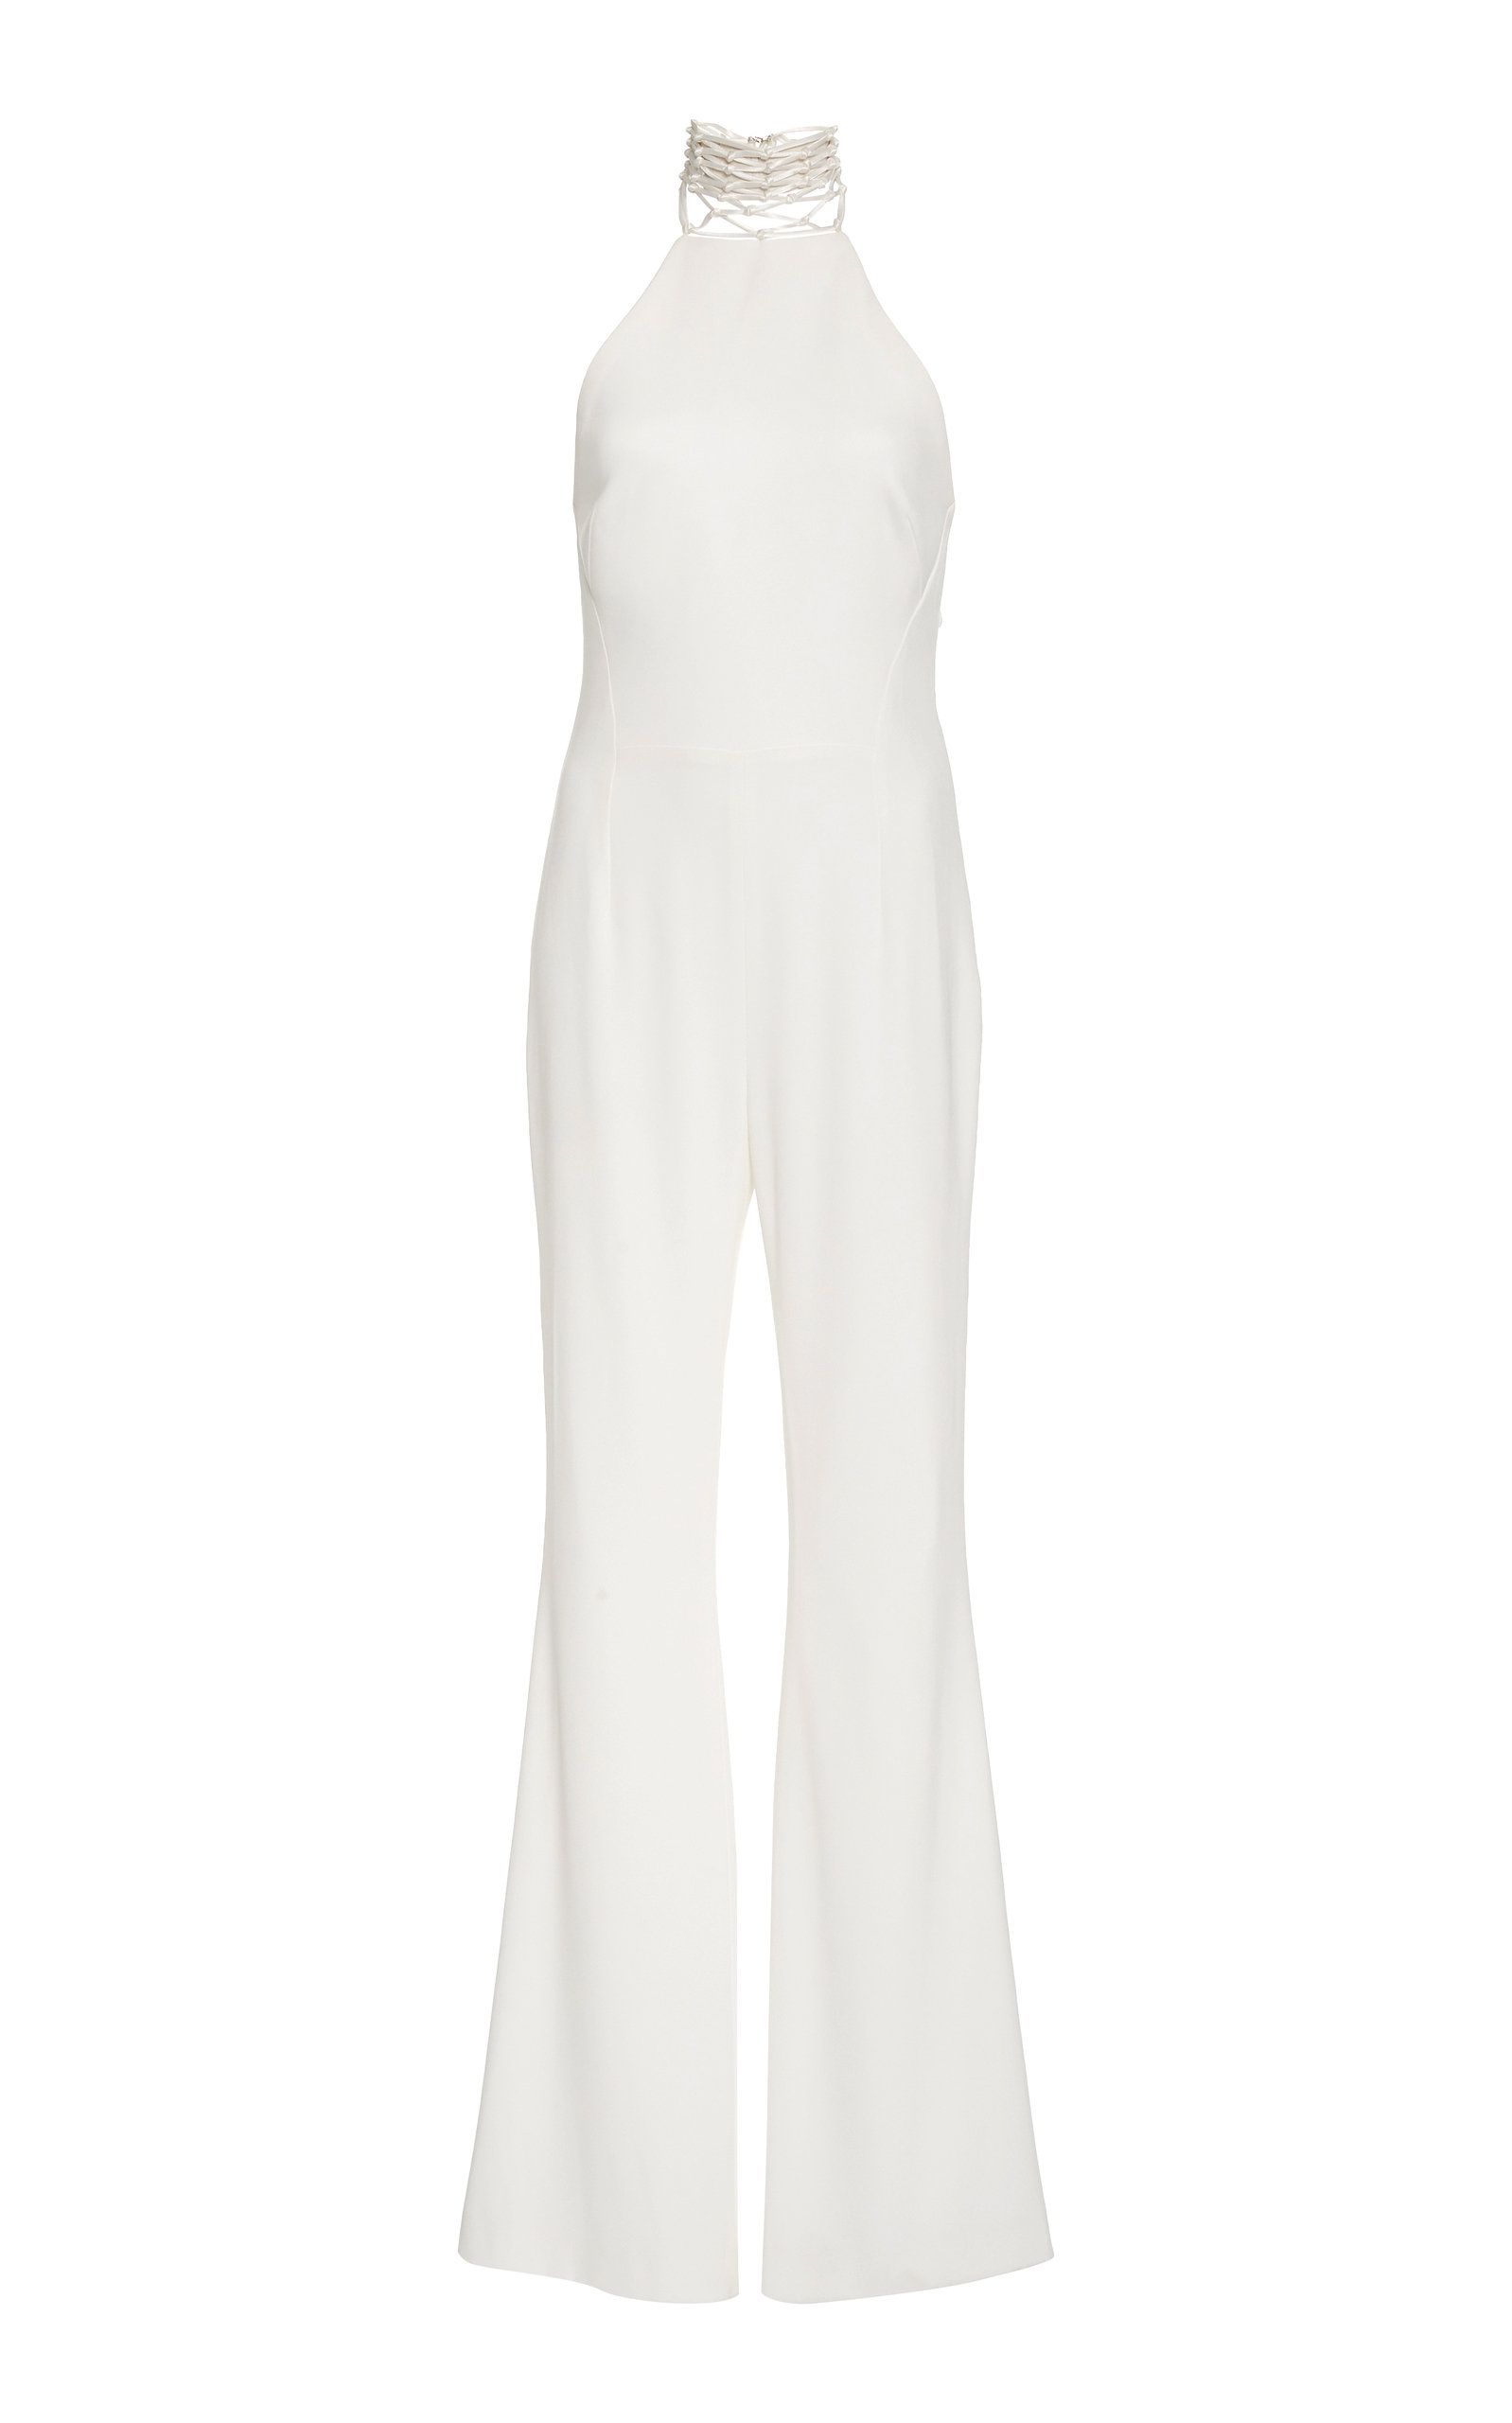 jumpsuits for wedding party